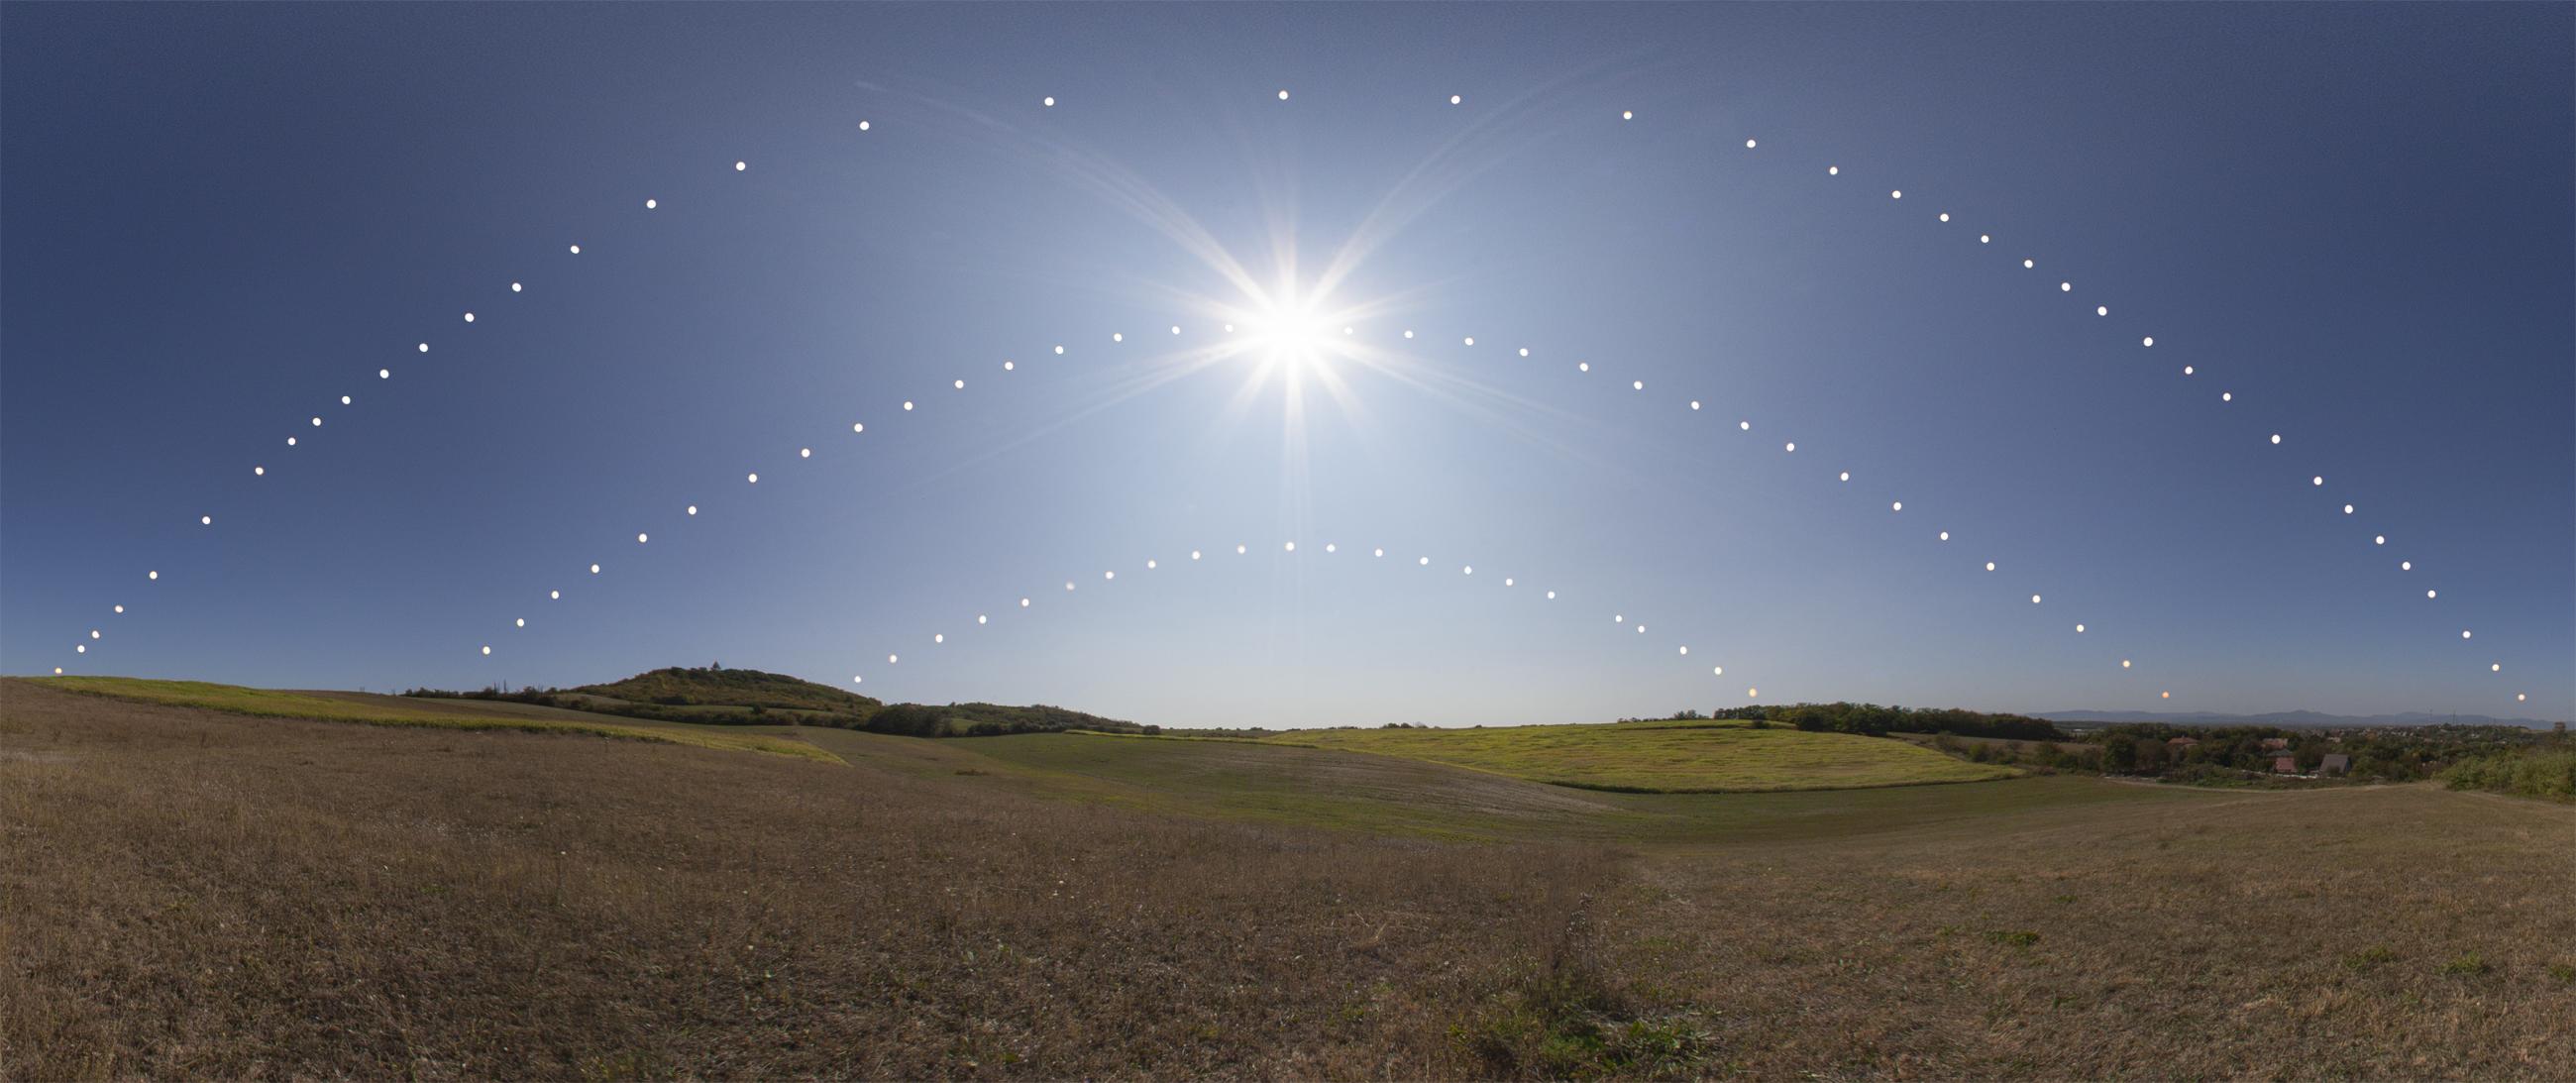 A composite image shows the sun's path in the sky at different times of the year over a grassy landscape, with three arches of sun positions represented by dots, illustrating the earliest solstice.